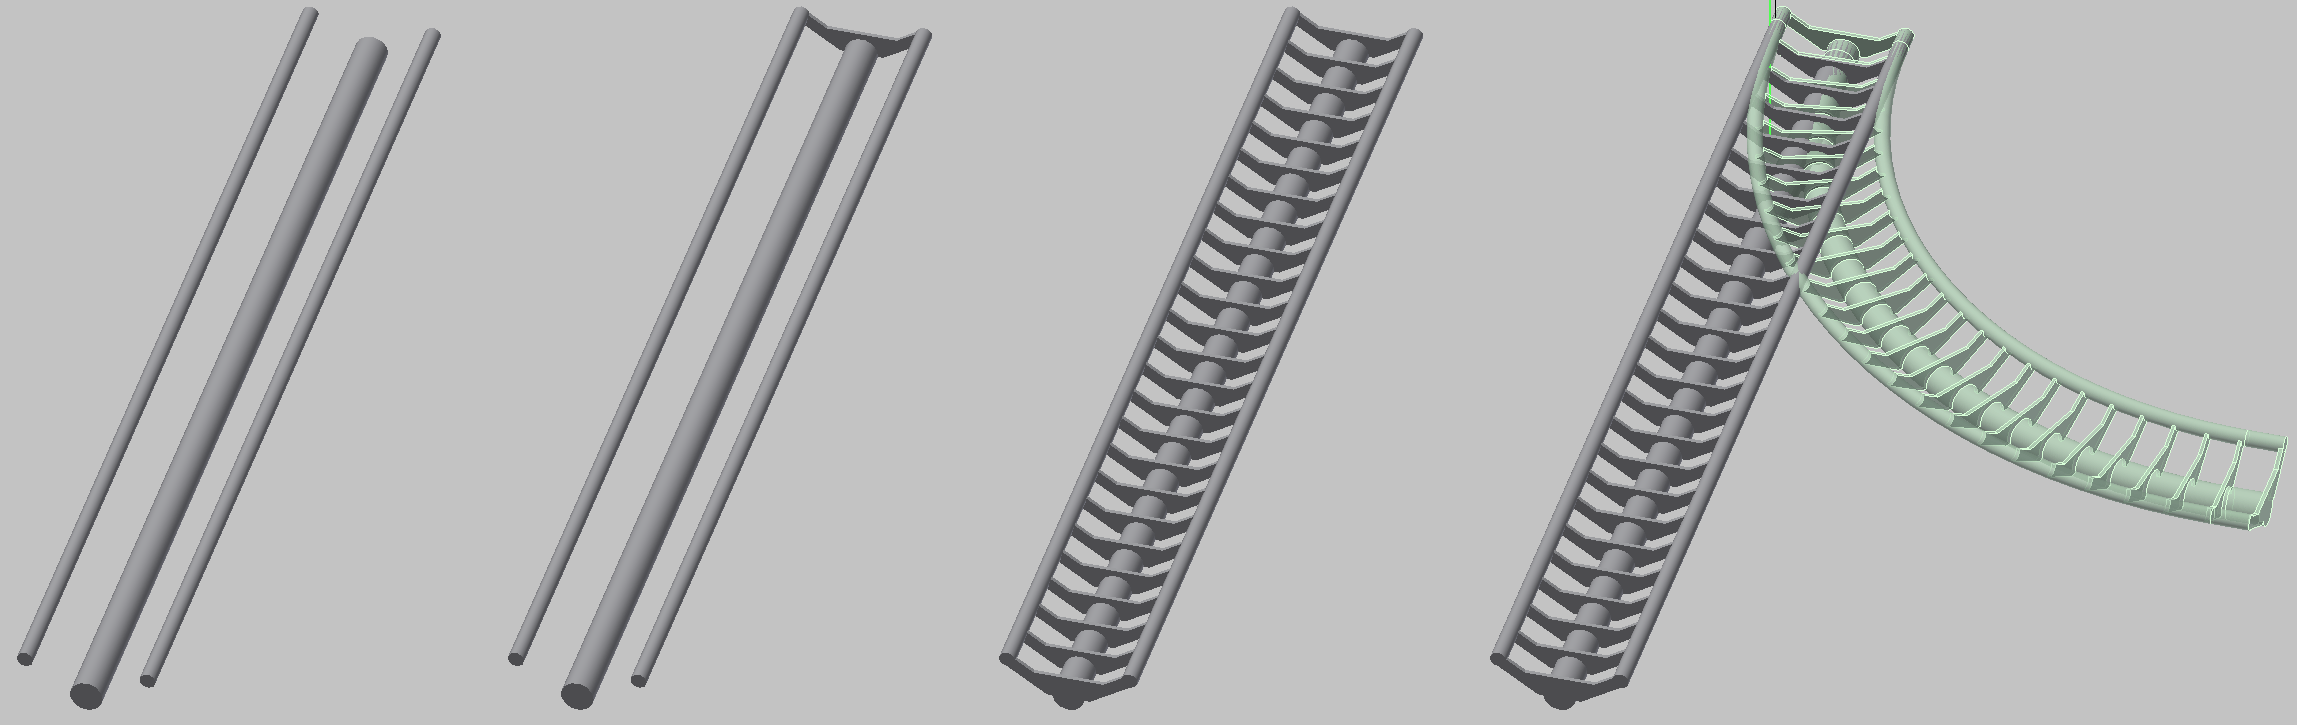 Screenshot of curved track in CAD